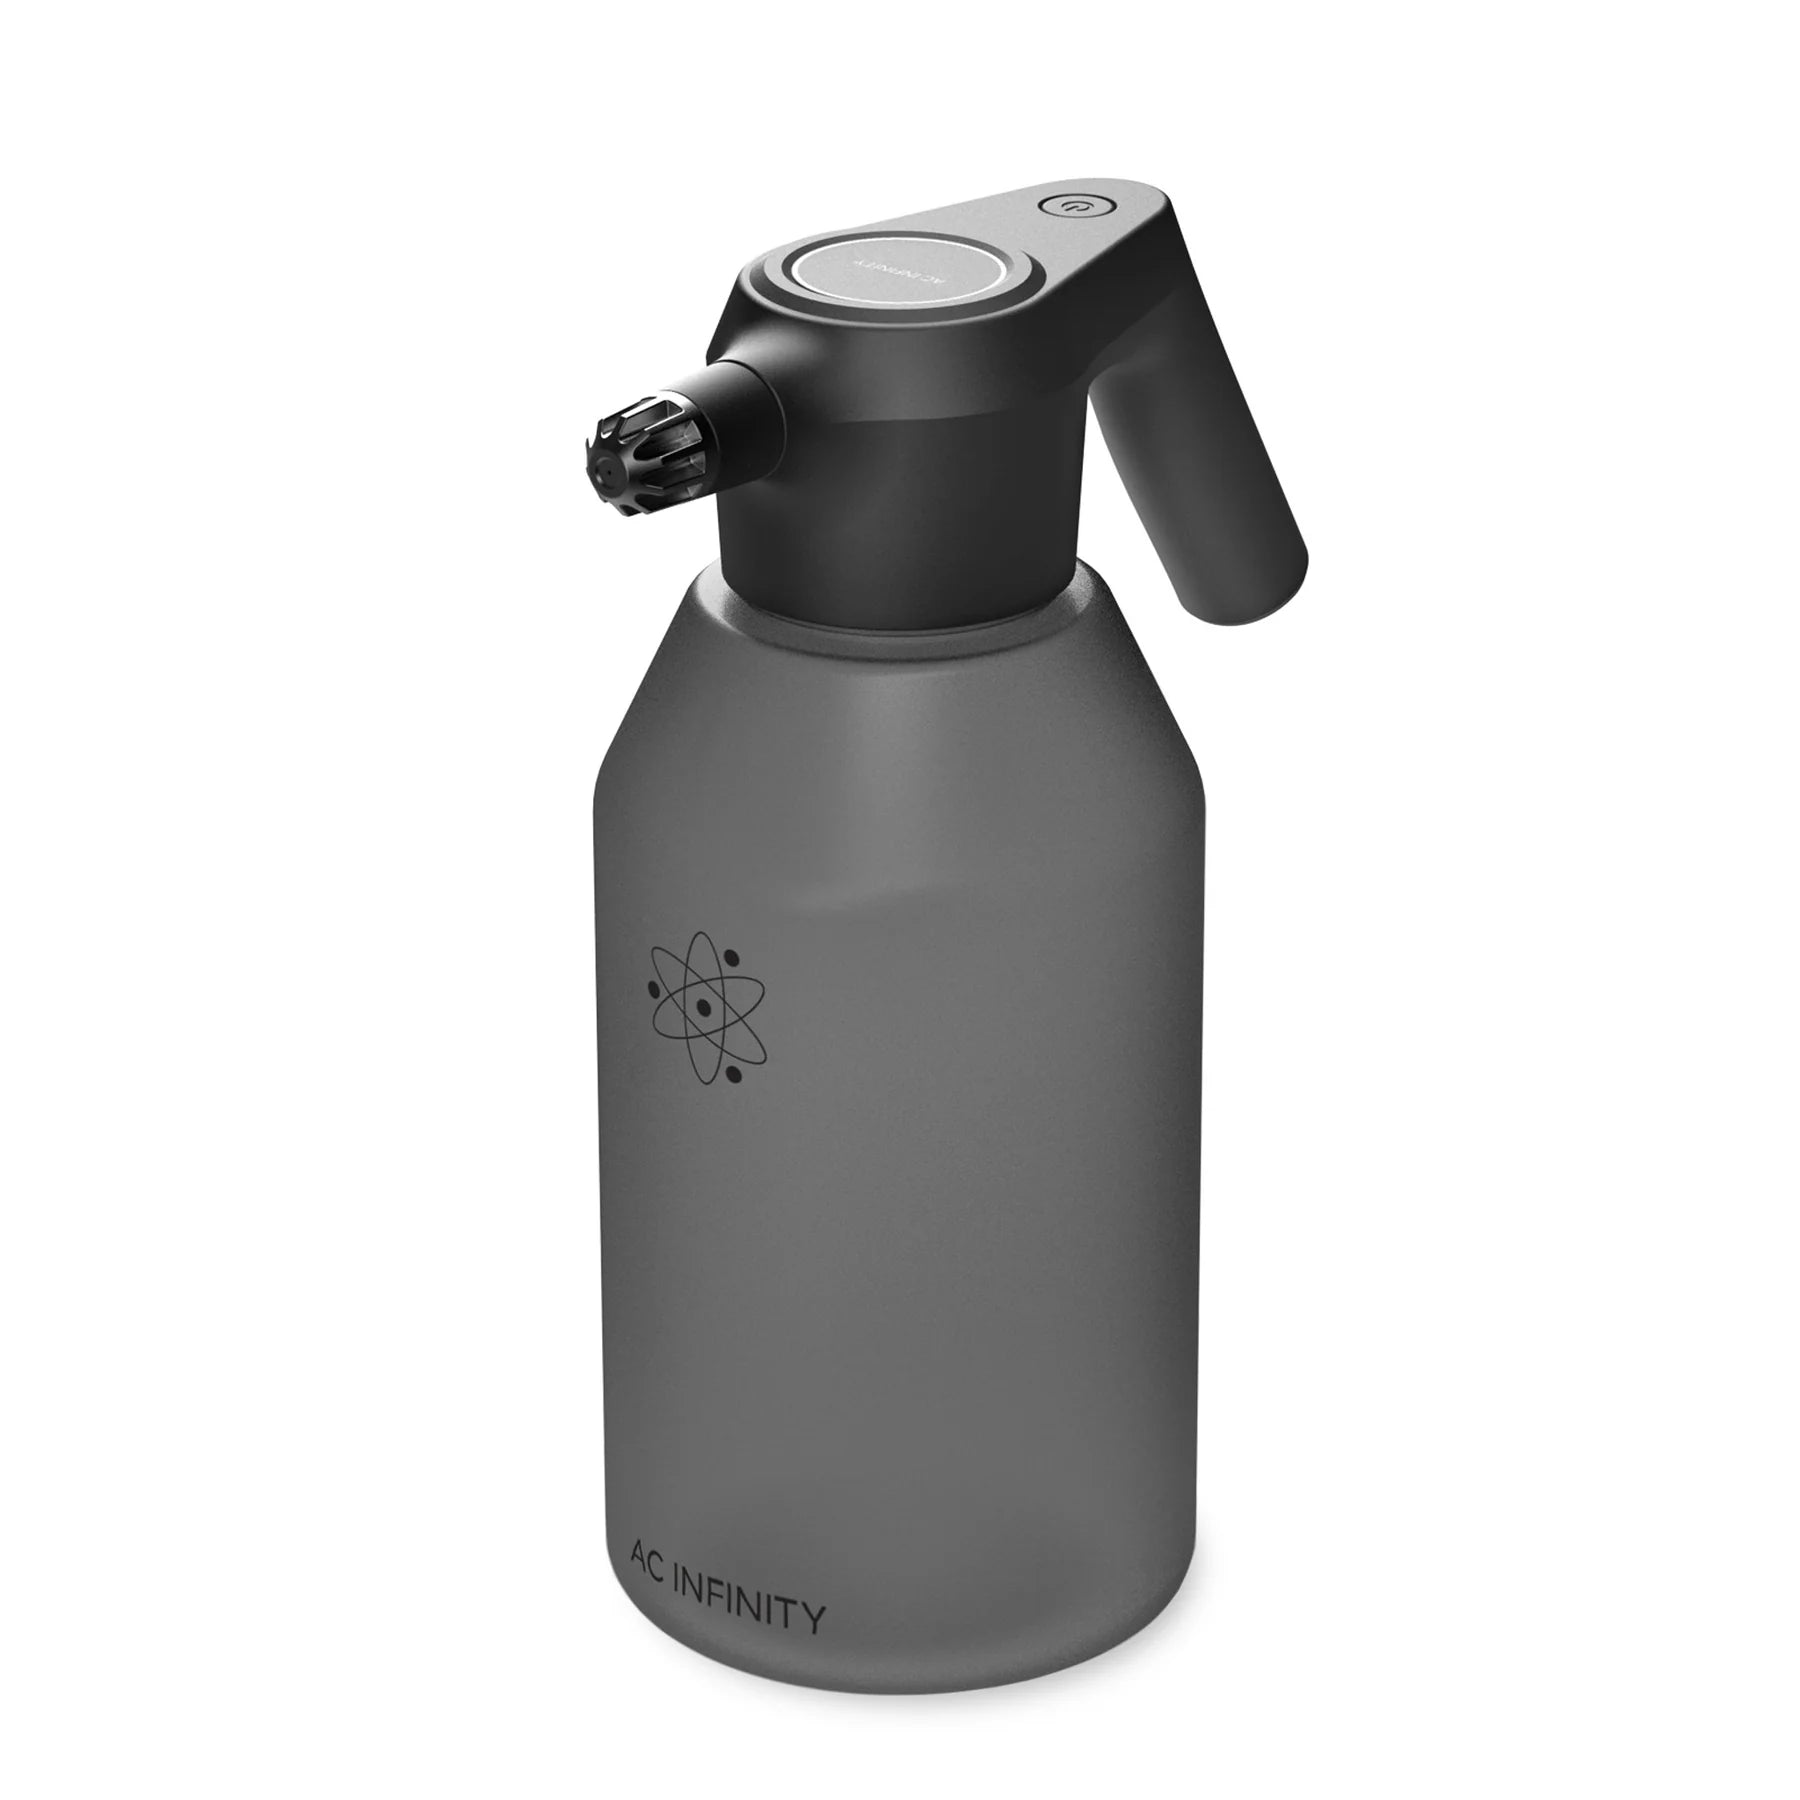 Pest & Diseases GRAPHITE Automatic Water Sprayer - 2L